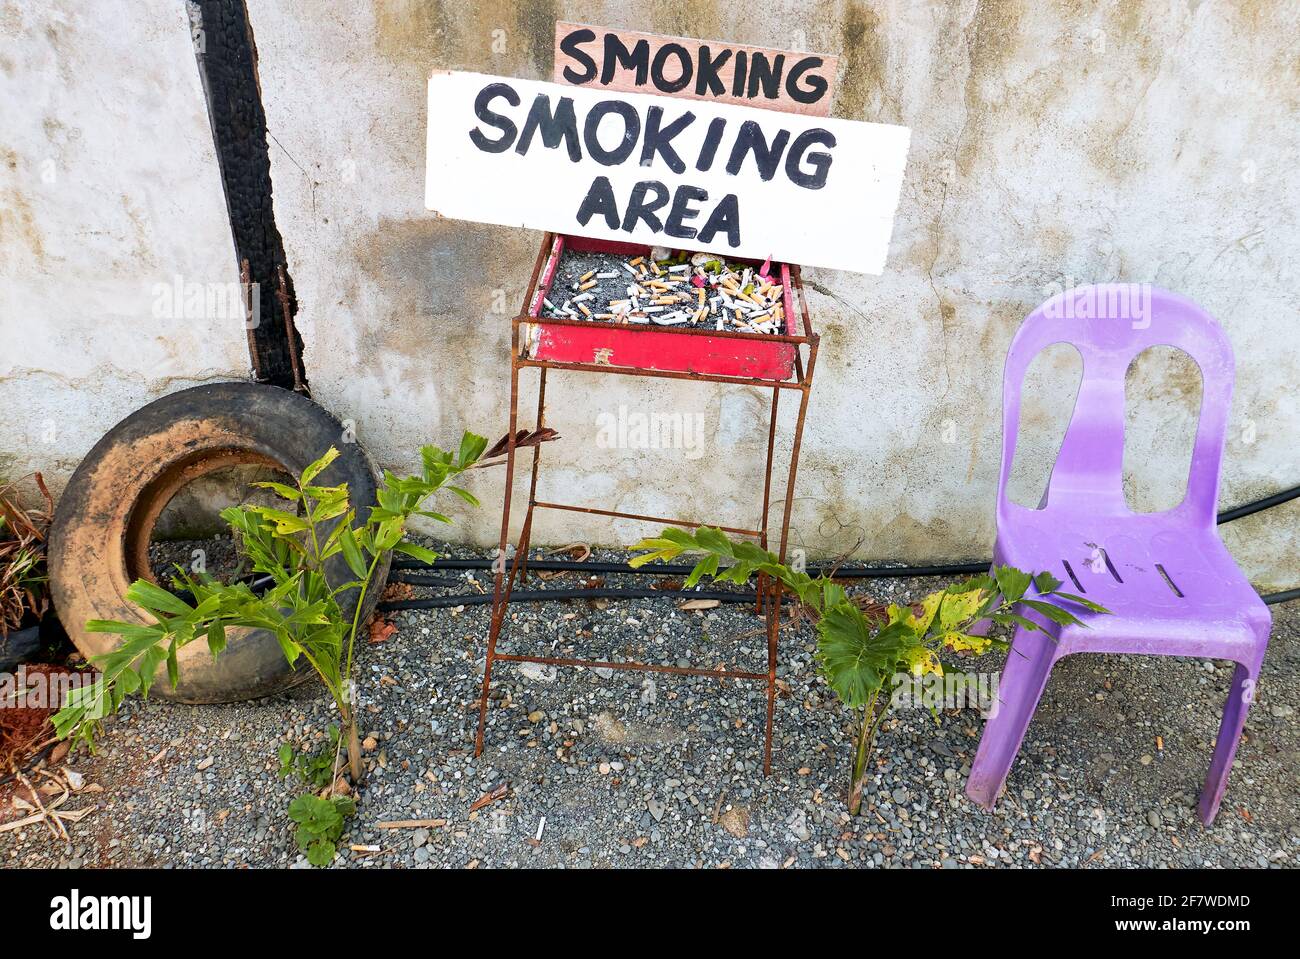 Improvised smoking area wit an ash tray full of cigarette butts placed outside next to a dirty wall, with one plastic chair for the smoker, Asia Stock Photo